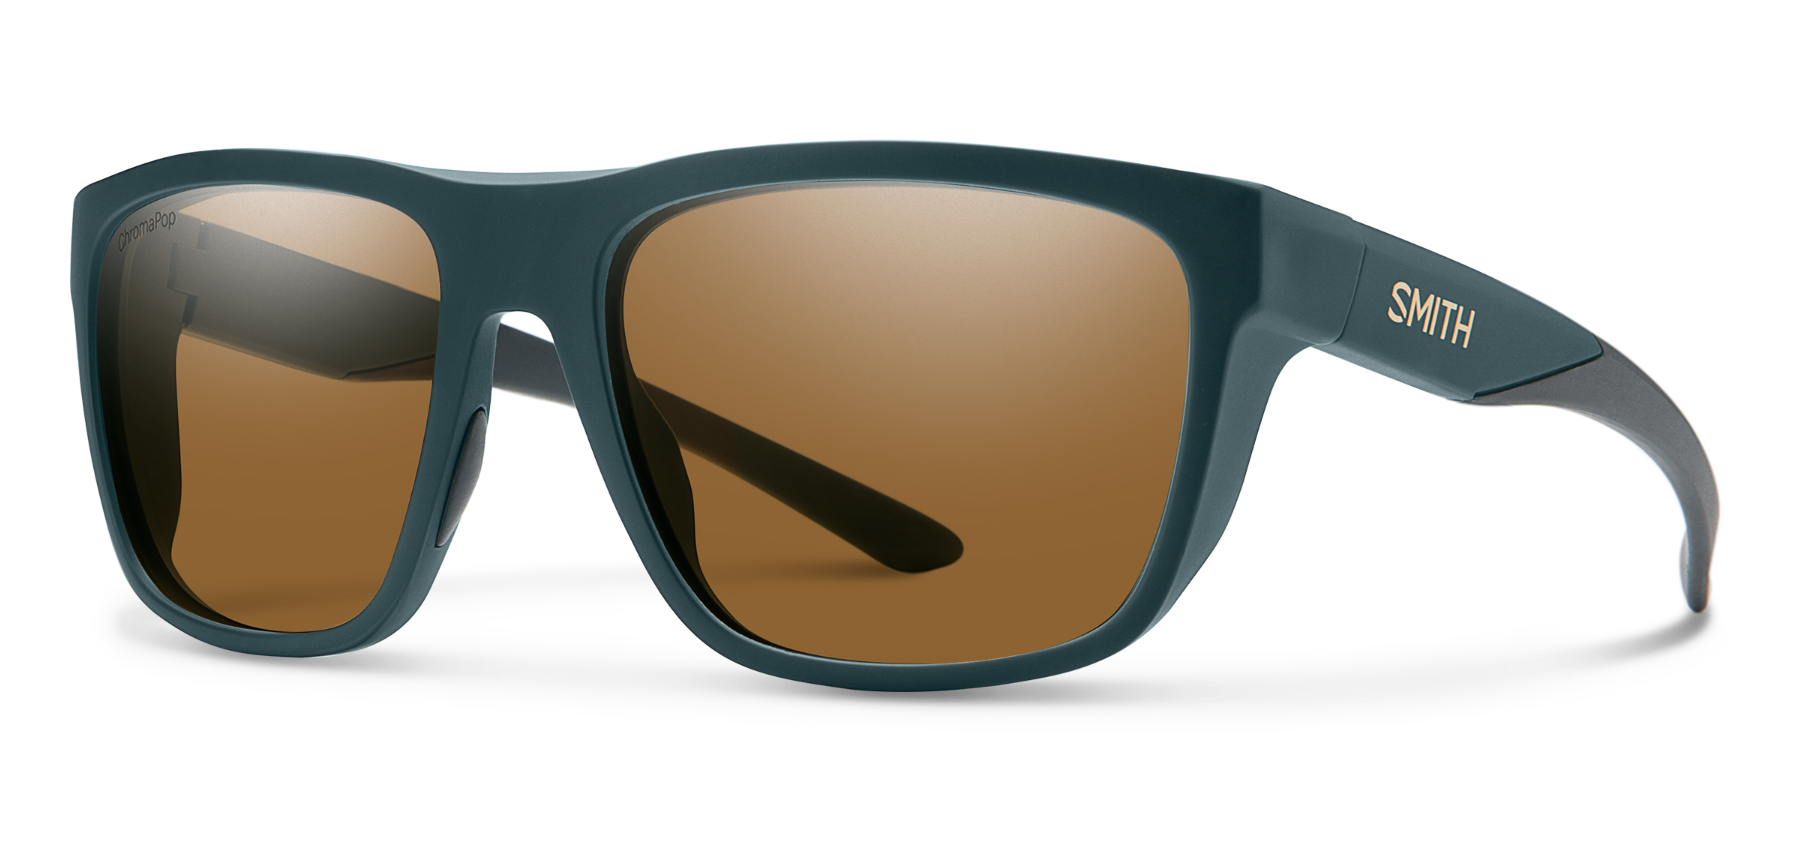 smith barra sunglasses in green with brown polarized lenses